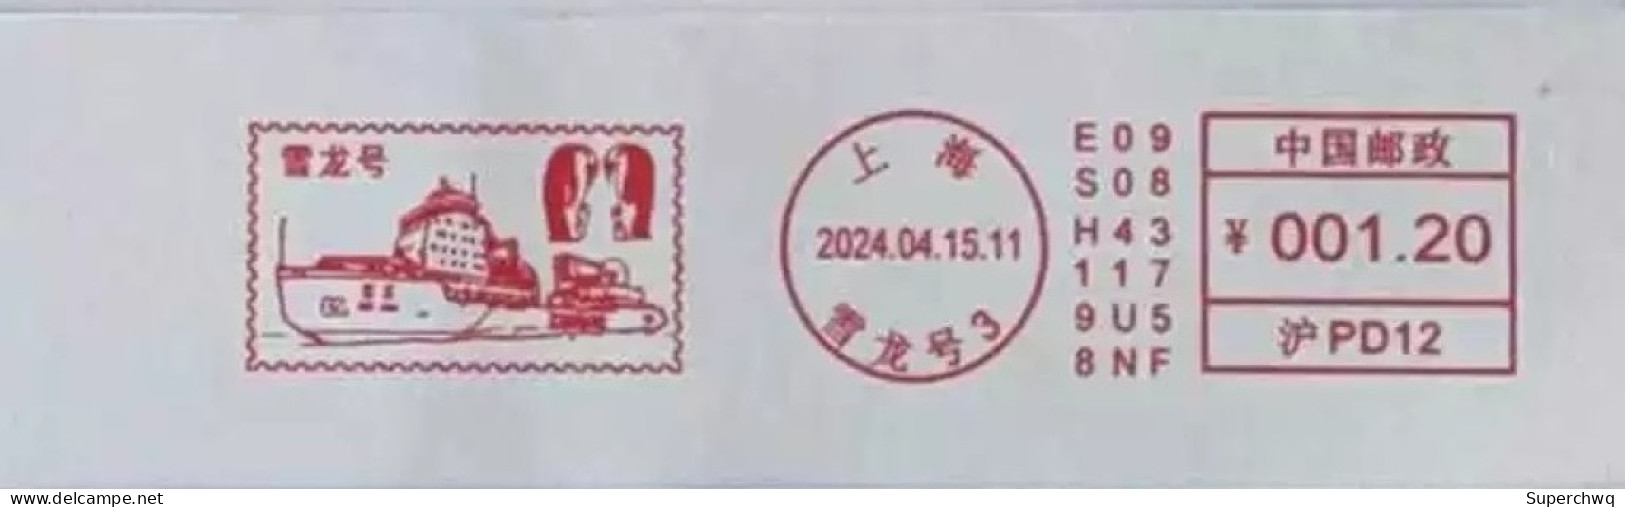 China Posted Cover，The Xuelong Polar Scientific Expedition Ship Postage Machine Stamp - Enveloppes